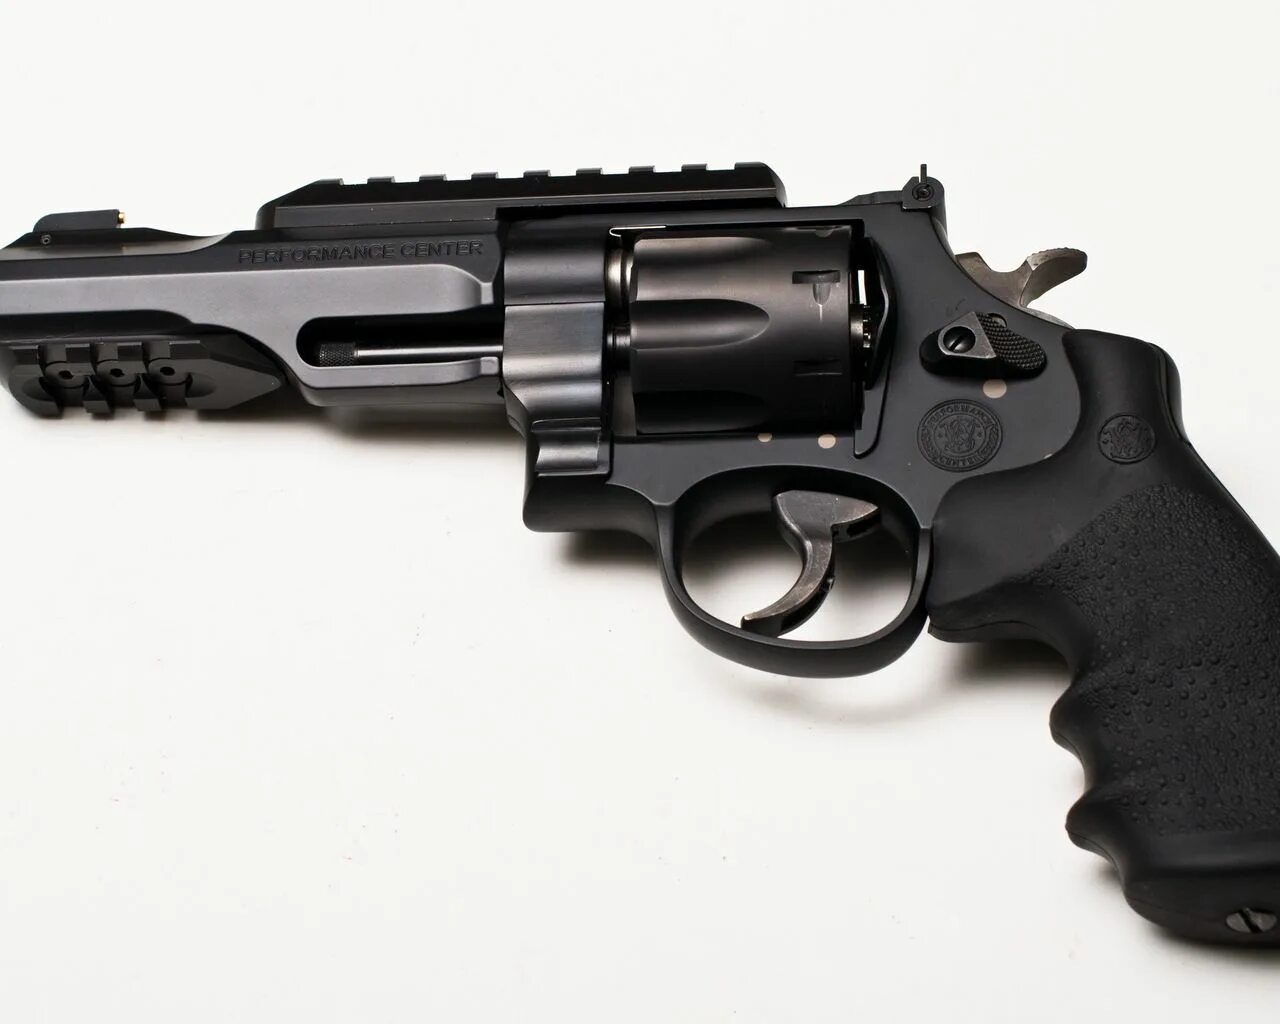 Just enough guns. Smith Wesson 327 trr8. Револьвер Smith Wesson. Револьвер Smith & Wesson 327.